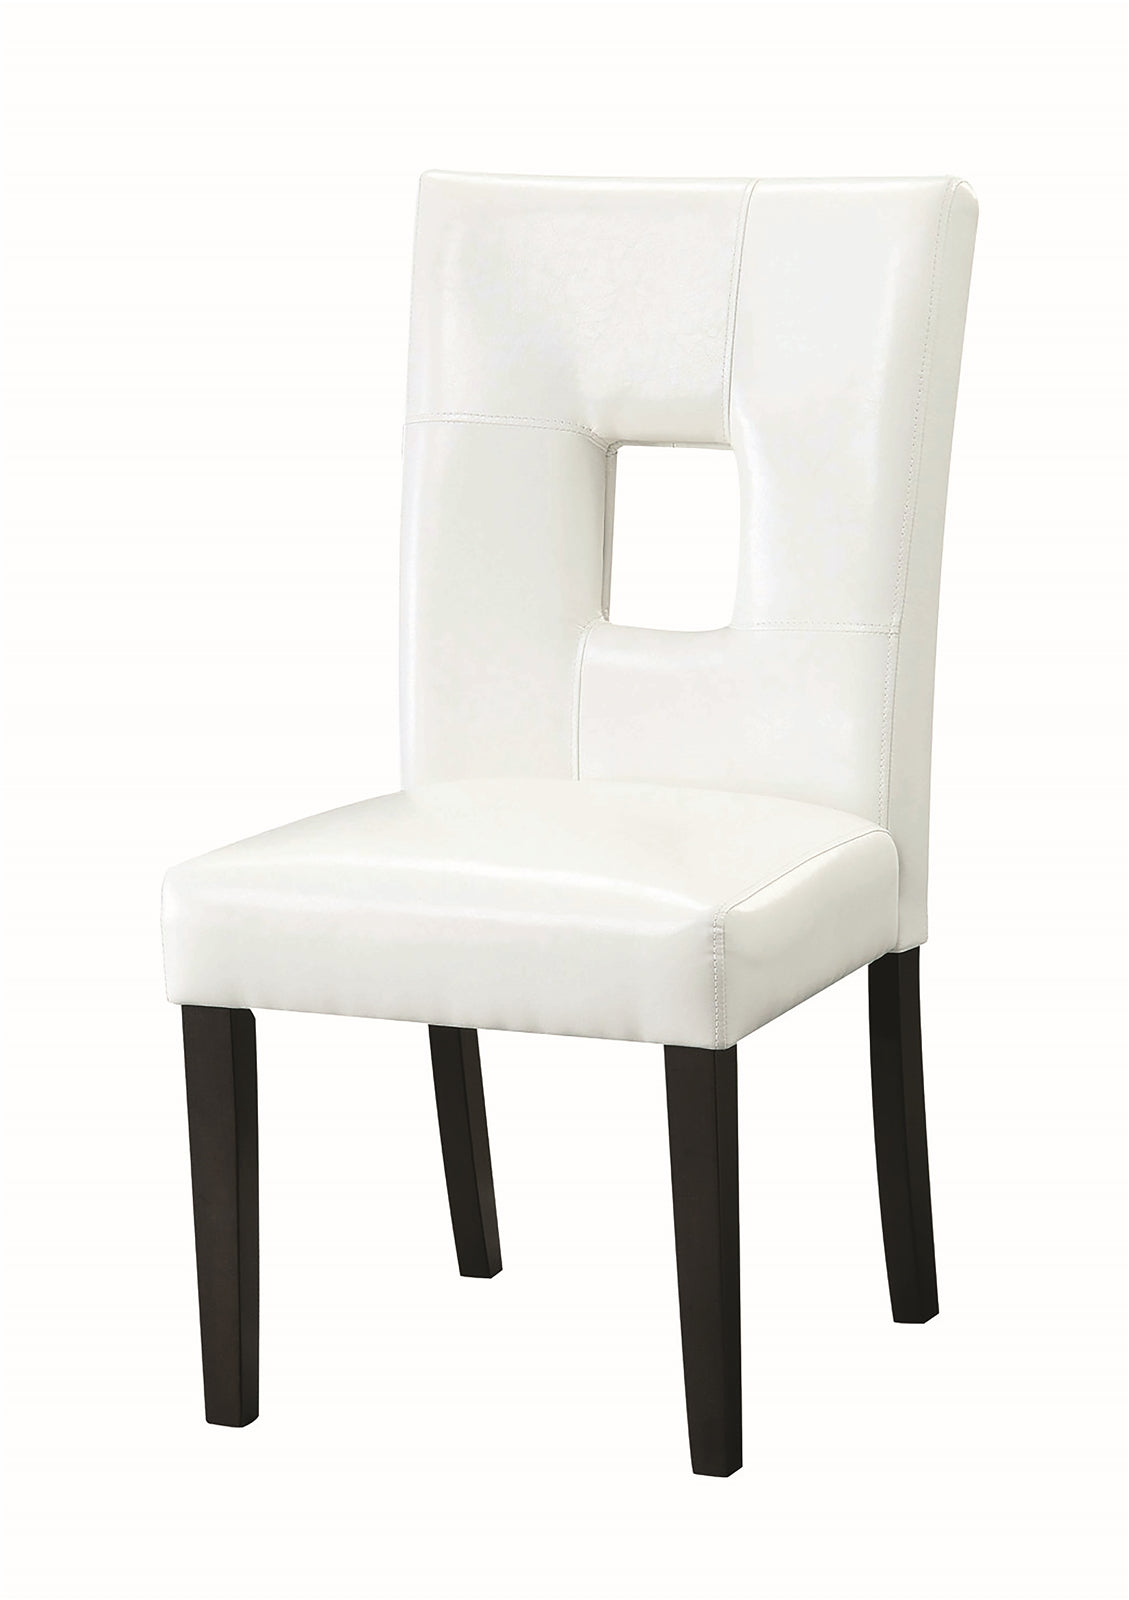 Anisa Contemporary White Leatherette Side Chair Set of 2 Chairs